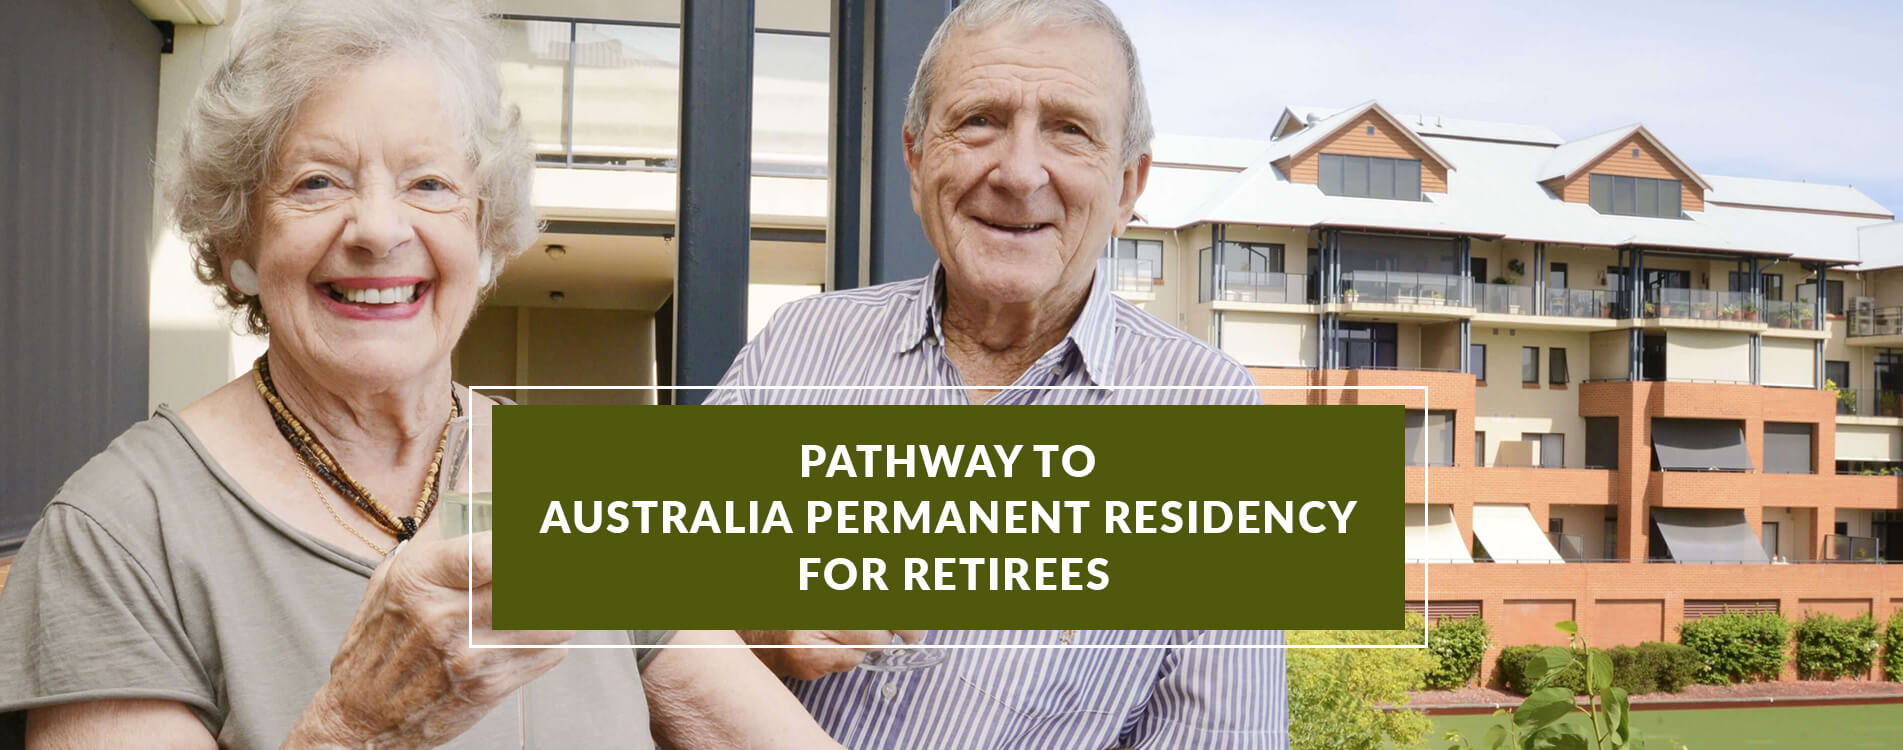 Pathway to Permanent Residency for Retirees